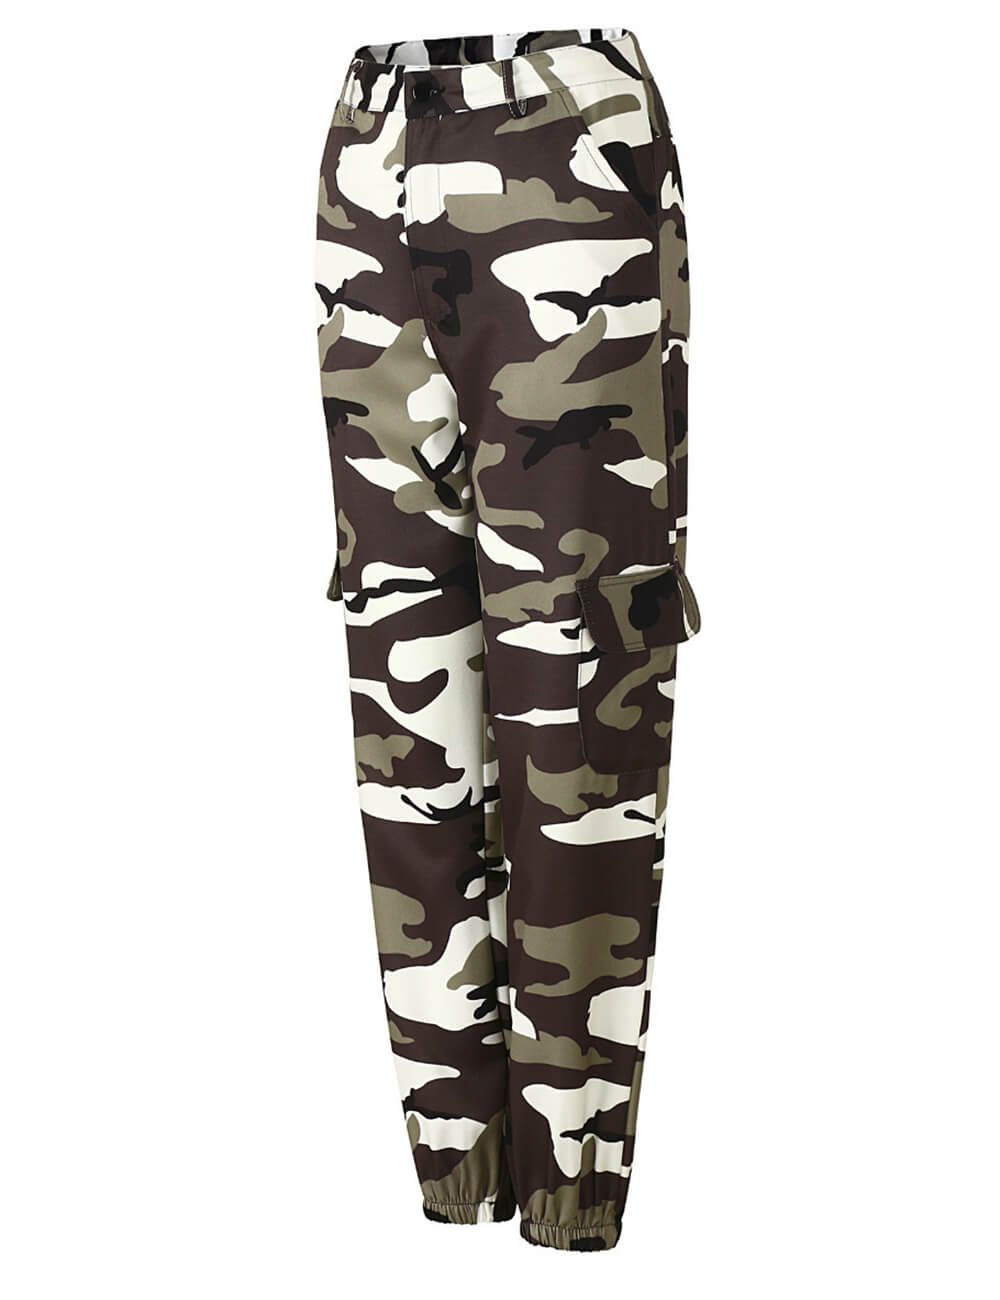  Women's Loose Camo Hip Pop High Rise Cropped Beam Pants Straight Leg Sweatpants Joggers Overall Cargo Pants